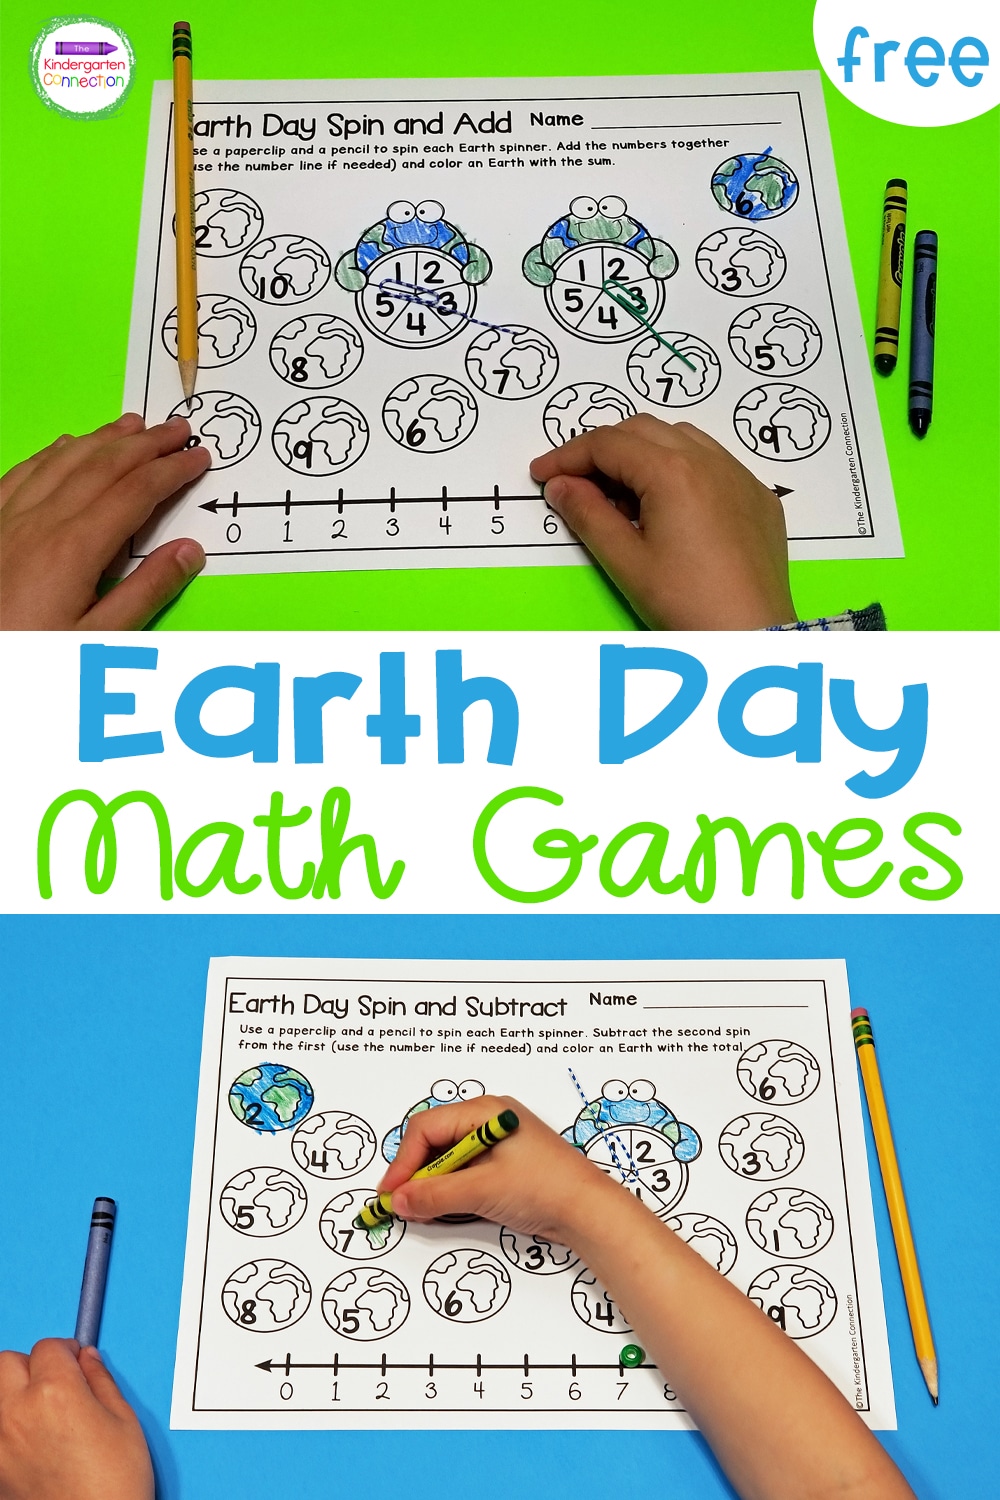 These free printable Earth Day math games are great for Pre-K, Kindergarten, and 1st grade students to develop number sense and math skills!